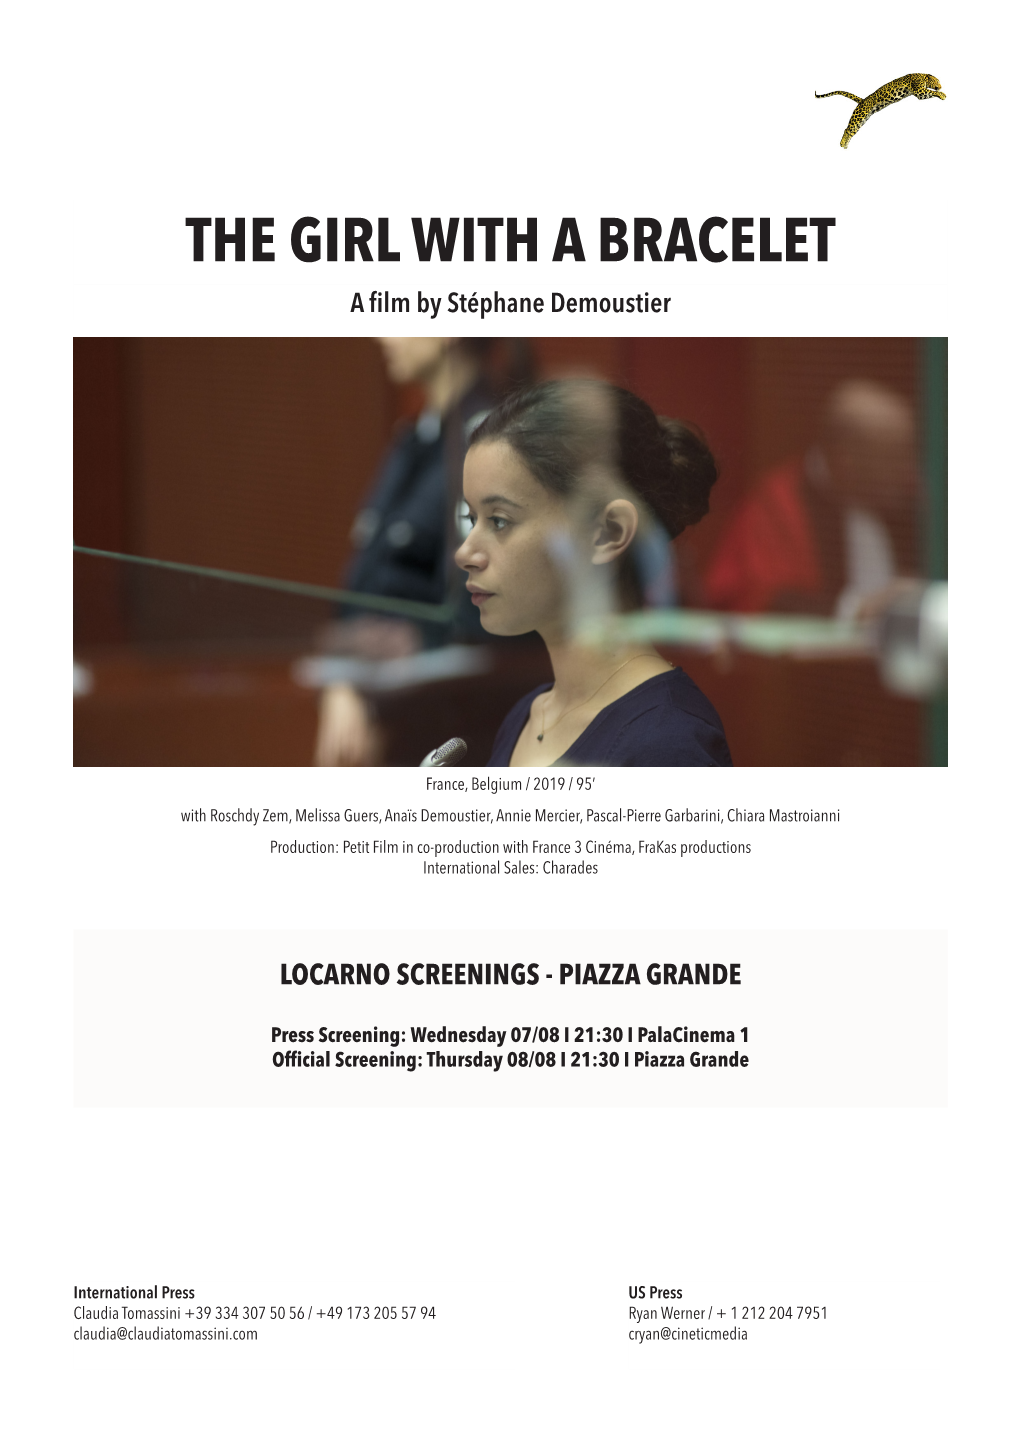 THE GIRL with a BRACELET a Film by Stéphane Demoustier